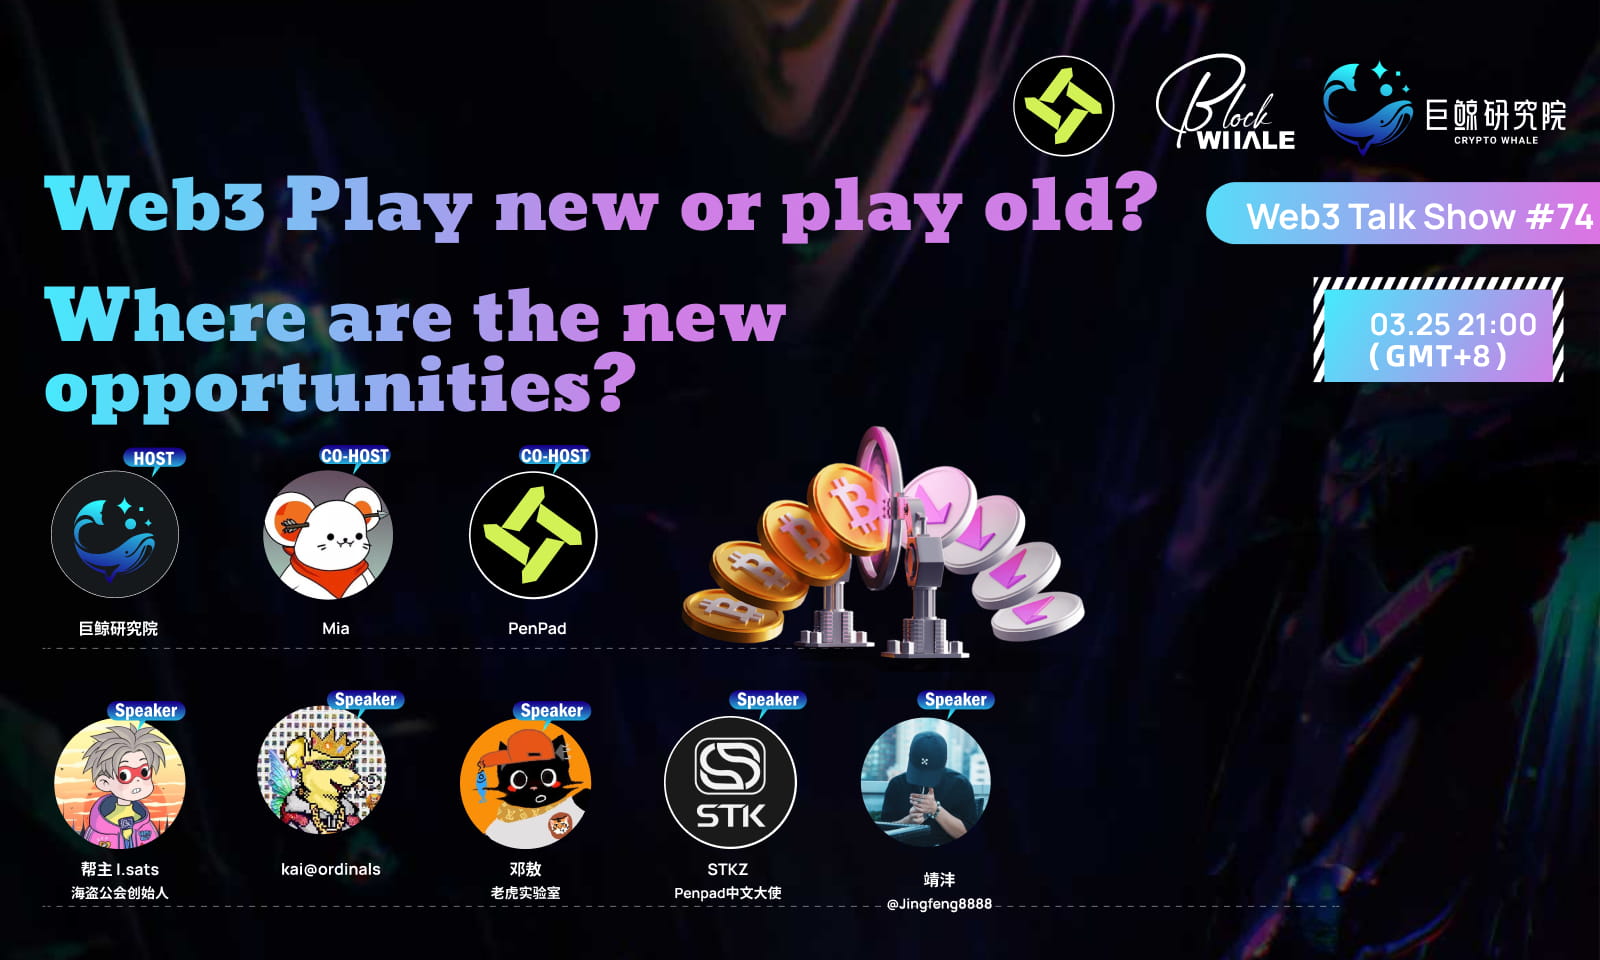  Web3 Play new or play old?Where are the new opportunities?